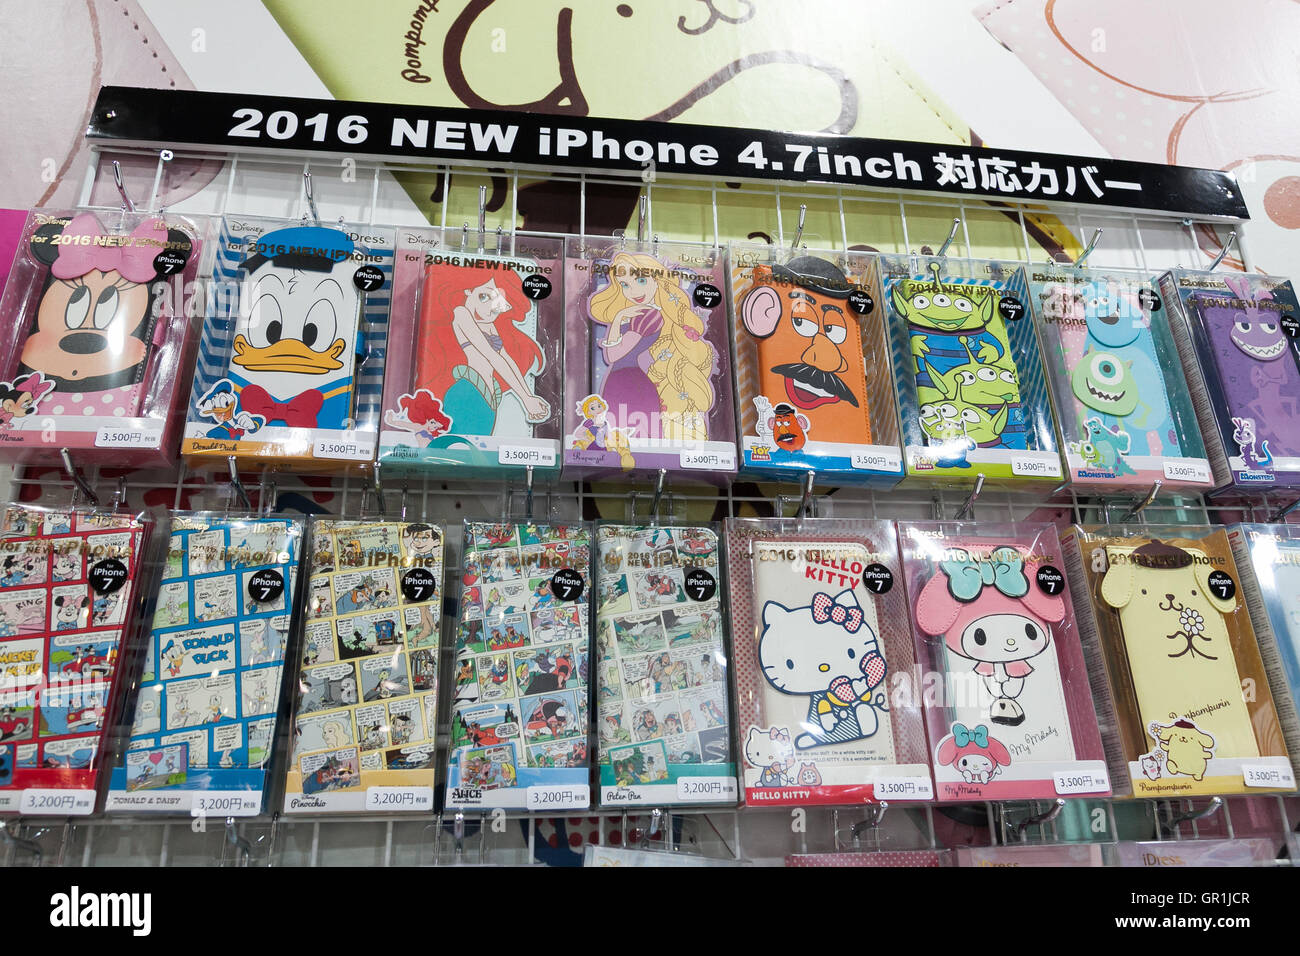 iPhone cases for Apple's new iPhone 7 smartphone, which is due to be announced today, on display at the Tokyo Gift Show exhibition on September 7, 2016, Tokyo, Japan. The 82nd Tokyo International Gift Show Autumn 2016 exhibition introduced Japanese and international goods from 2,729 companies, 686 of which came from 19 different countries outside of Japan, over three days from September 7th to 9th at Tokyo Big Sight. © Rodrigo Reyes Marin/AFLO/Alamy Live News Stock Photo